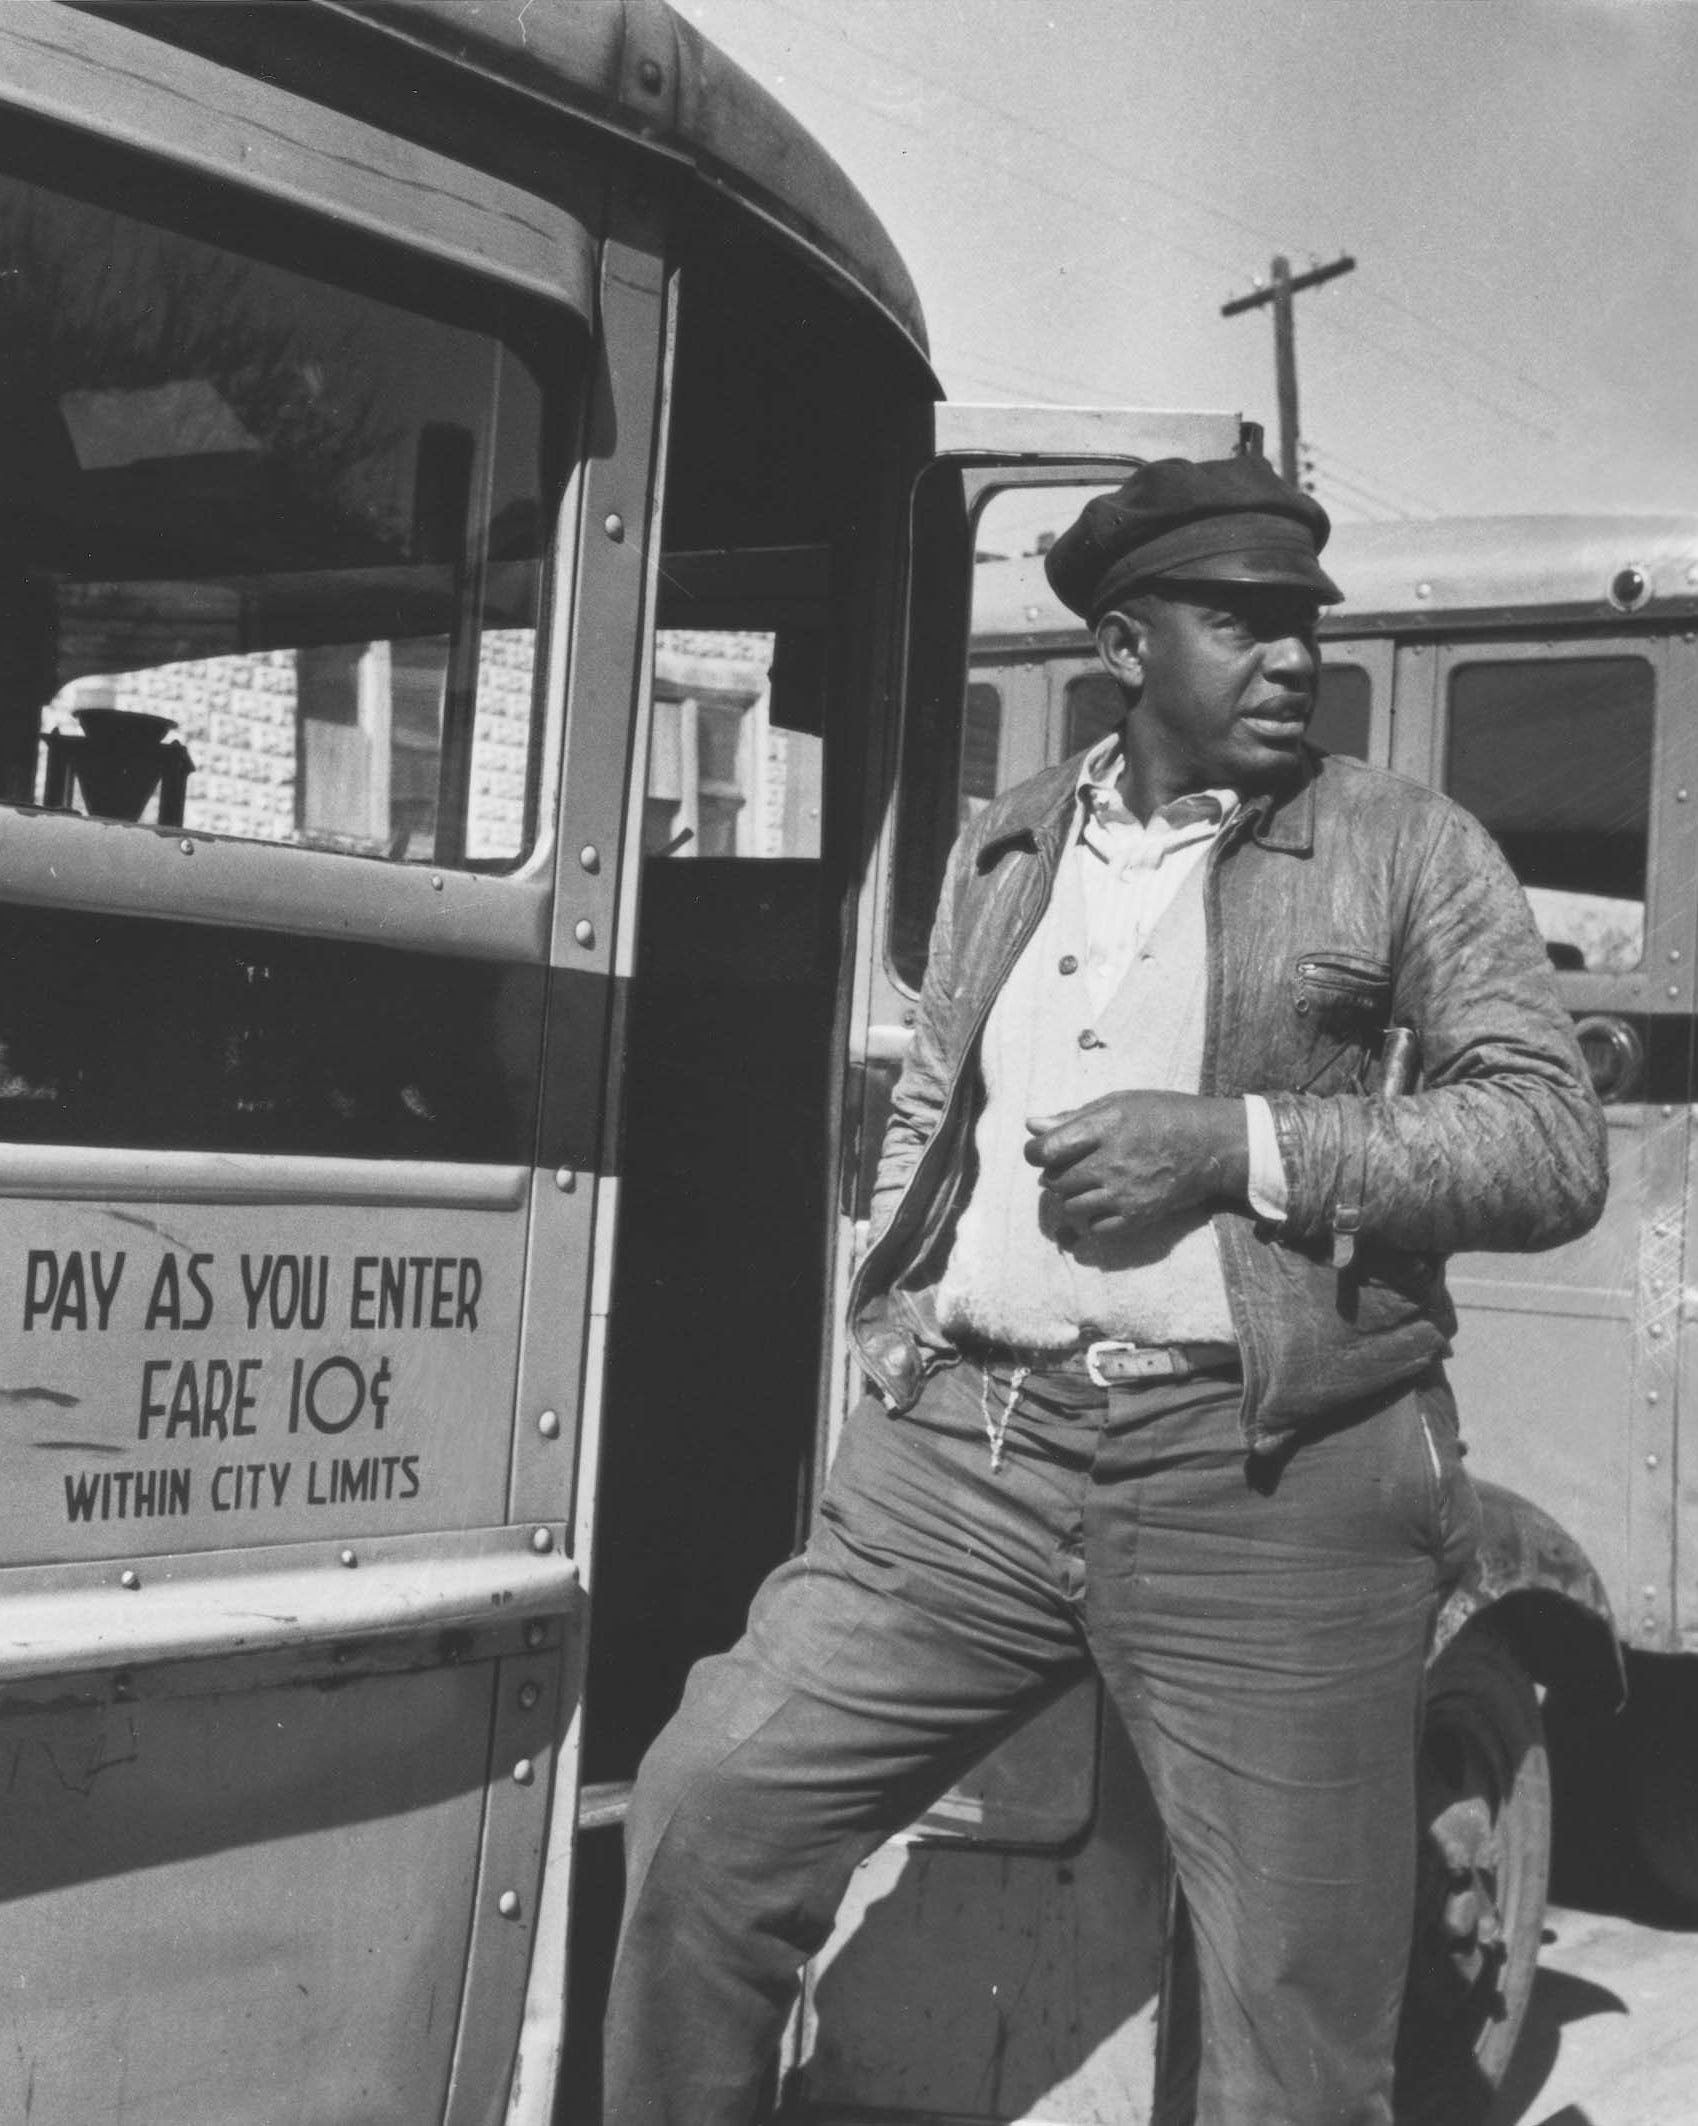 In the early and mid-1900s, Blacks had their own buses and routes. The buses were used to transport people to jobs on the beachside, and to the only beach Blacks could go to south of New Smyrna Beach.